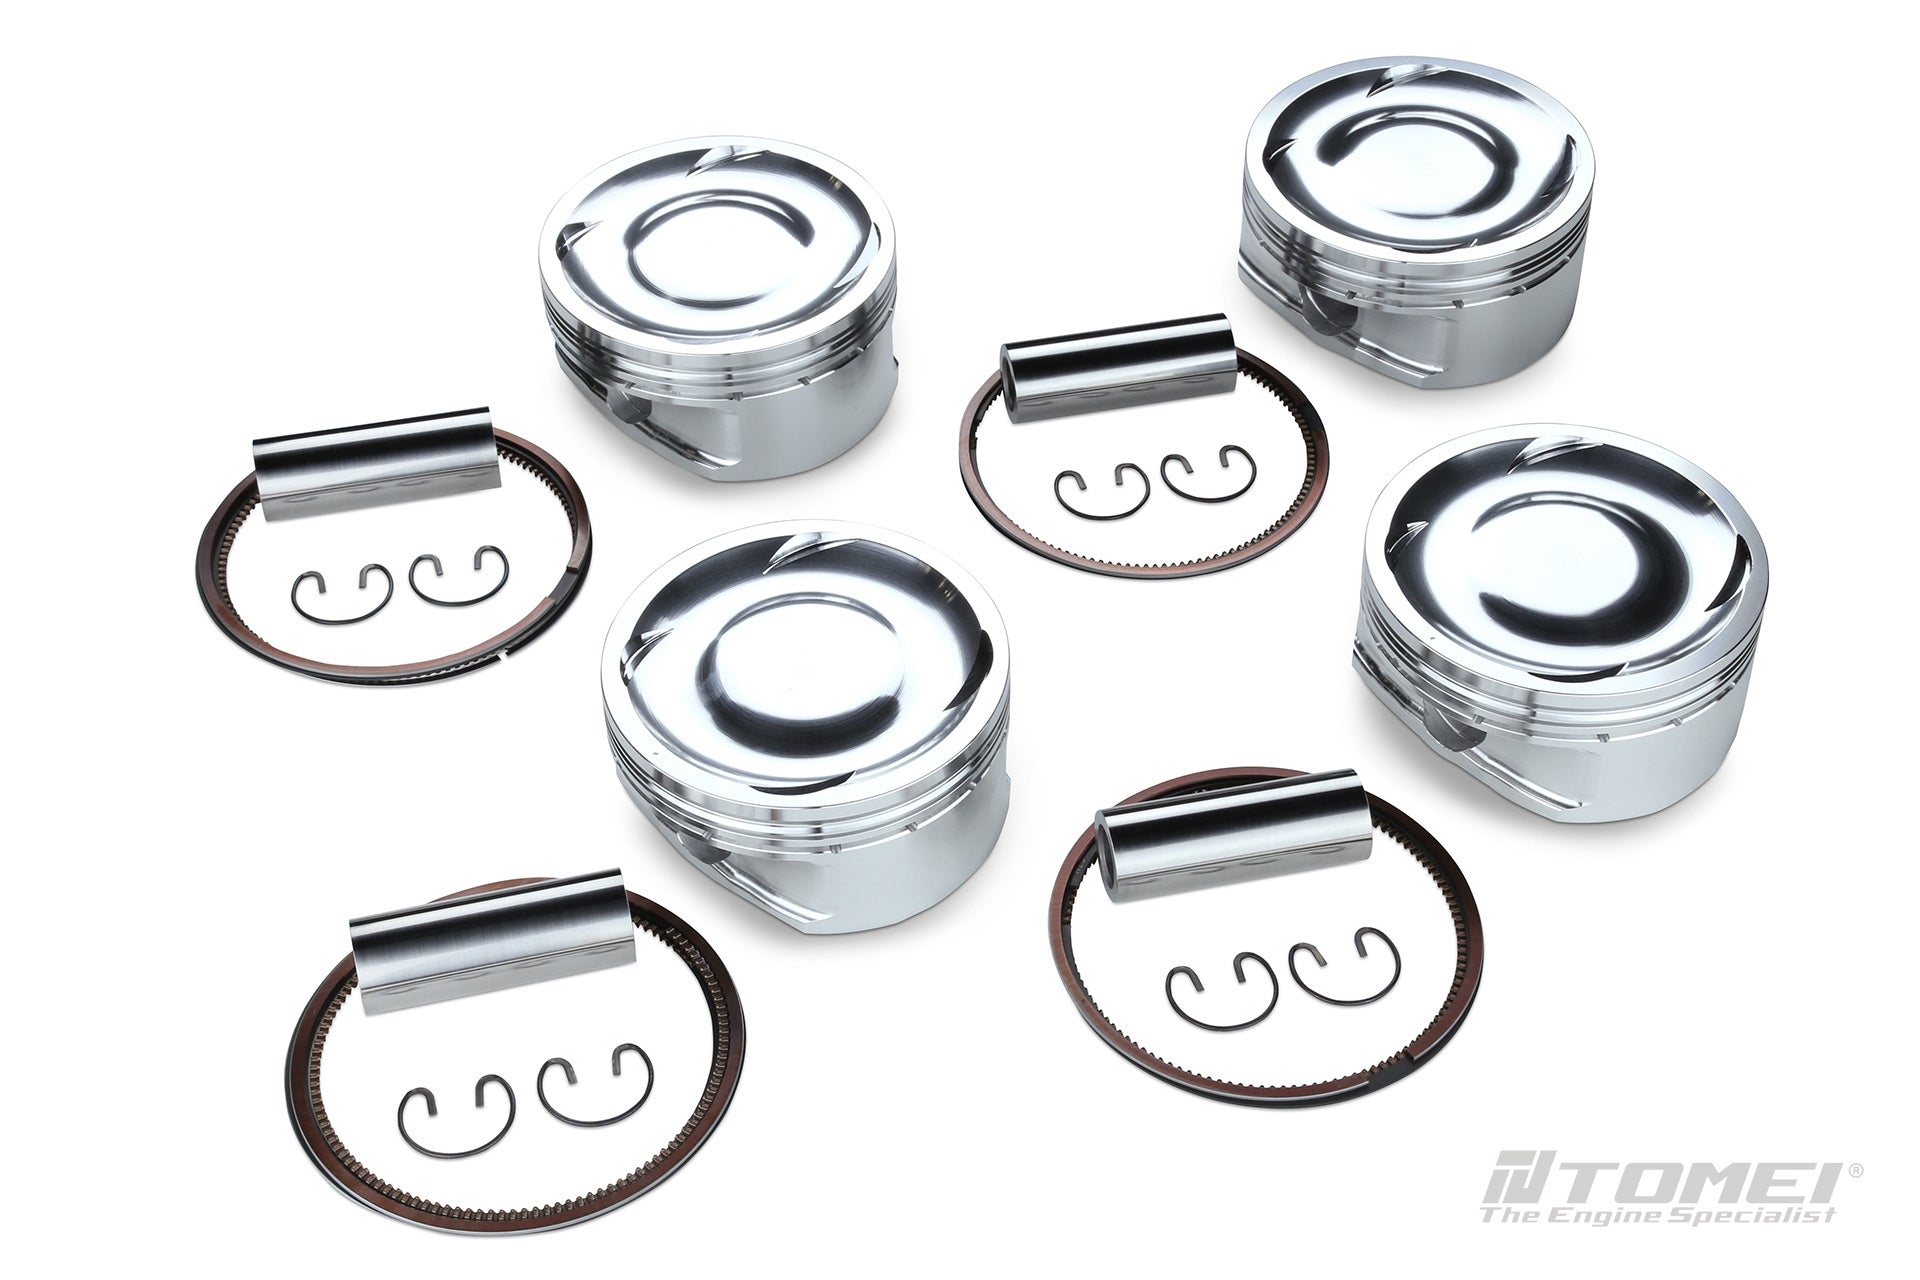 TOMEI FORGED PISTON KIT EJ25 99.75mm (Previous Part Number 1182997312)